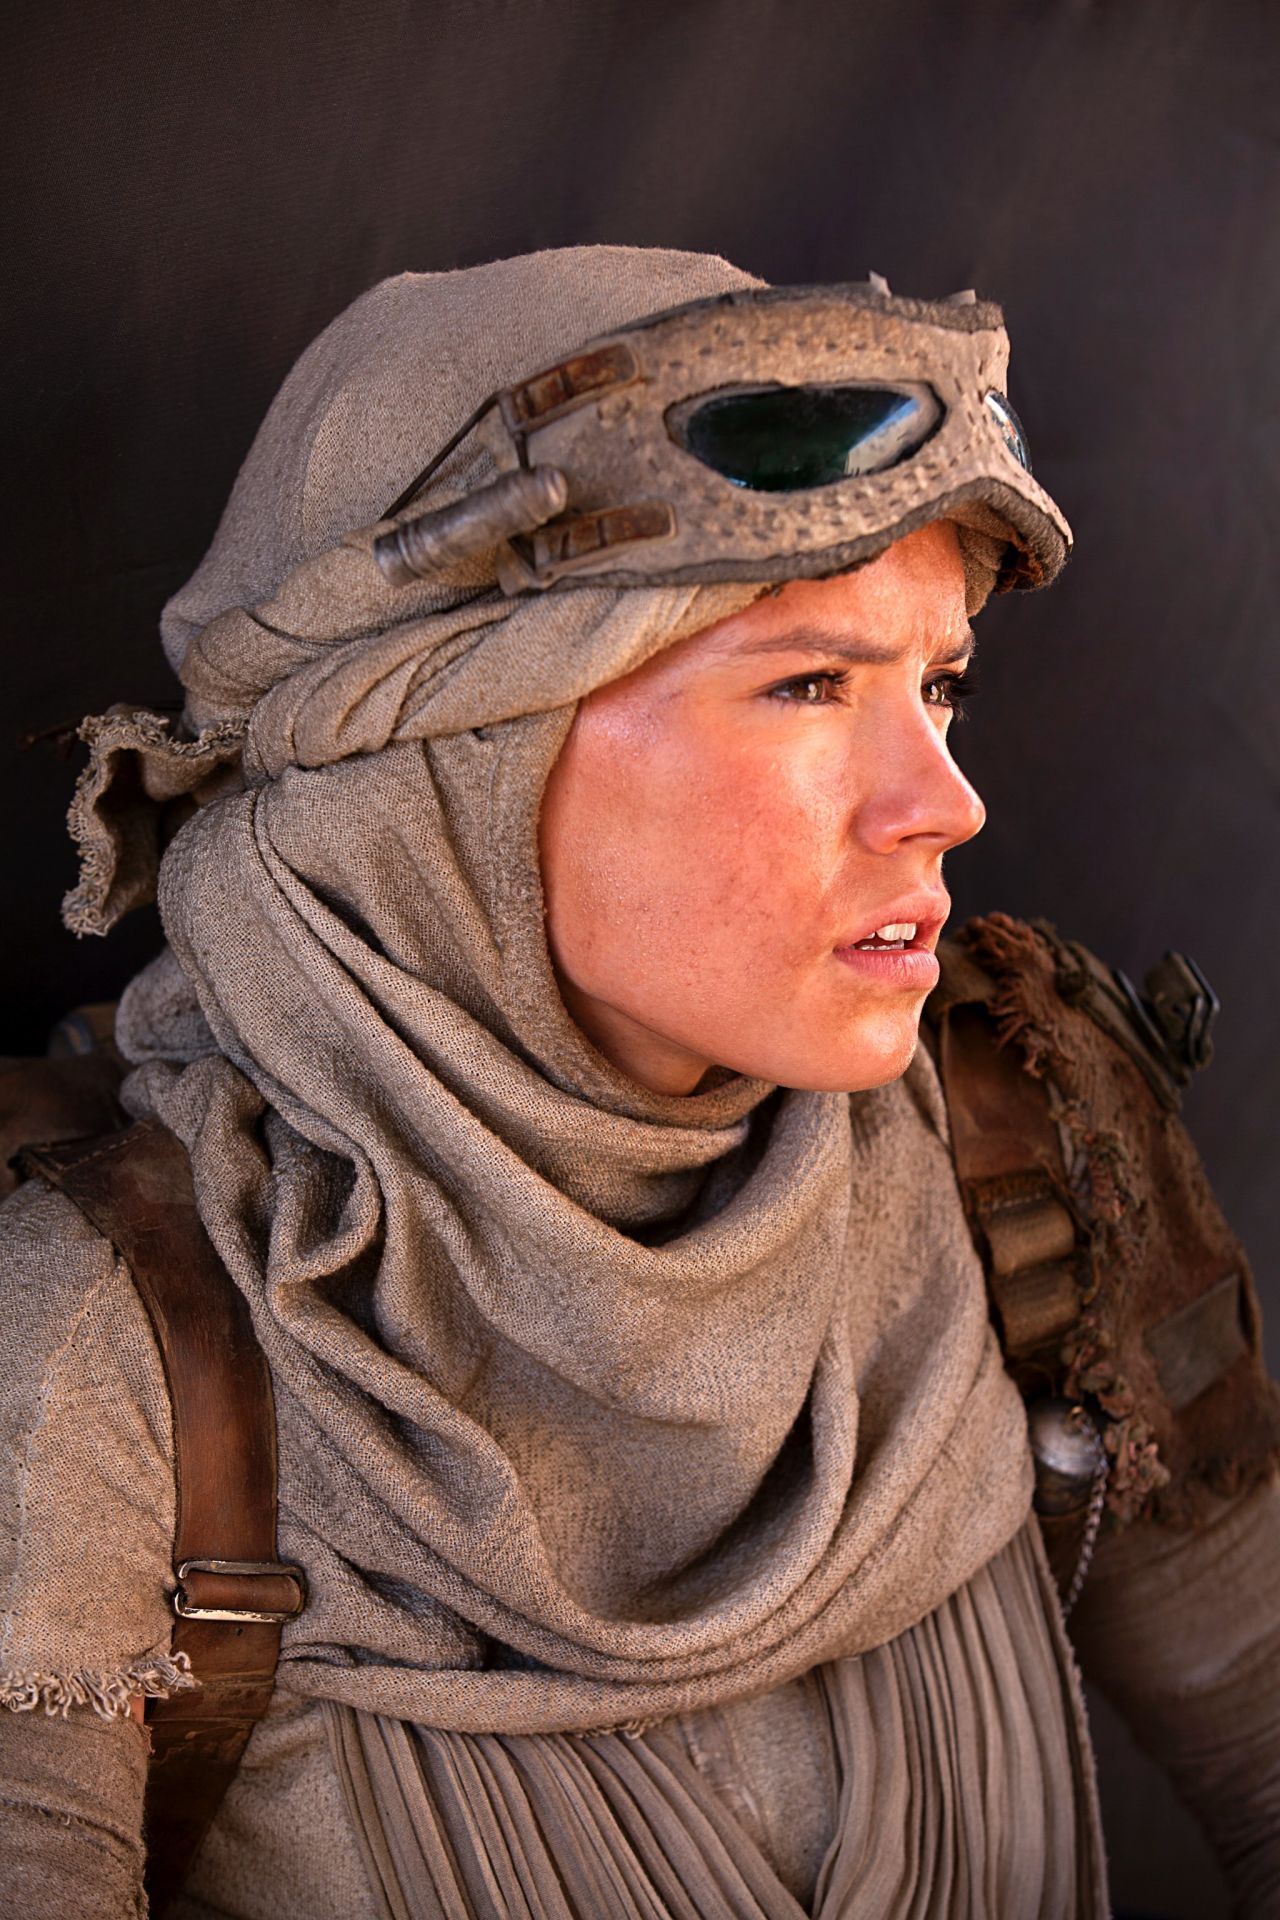 Daisy Ridley portrays Rey, a young scavenger on the desert planet of Jakku in "Star Wars: Episode VII - The Force Awakens."                                                       